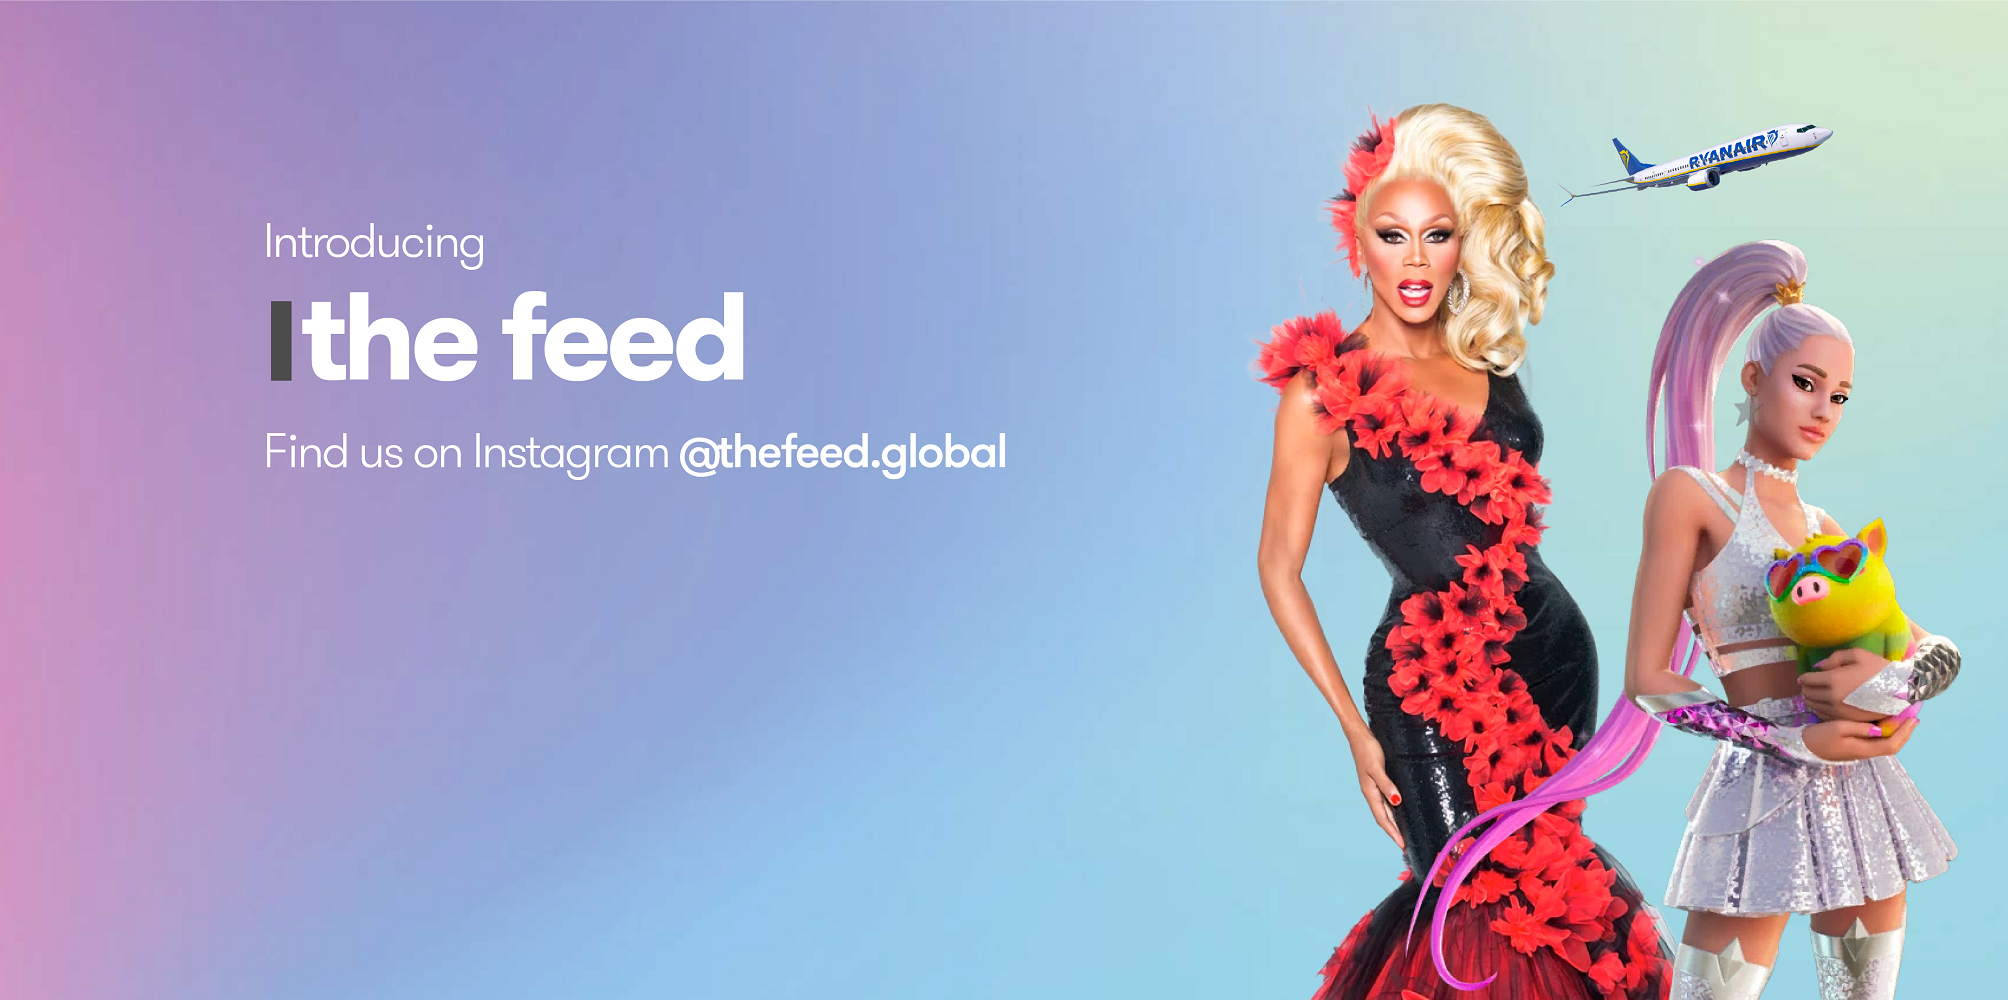 We Are Social Launches Instagram-Based Cultural Insights Publication, The Feed